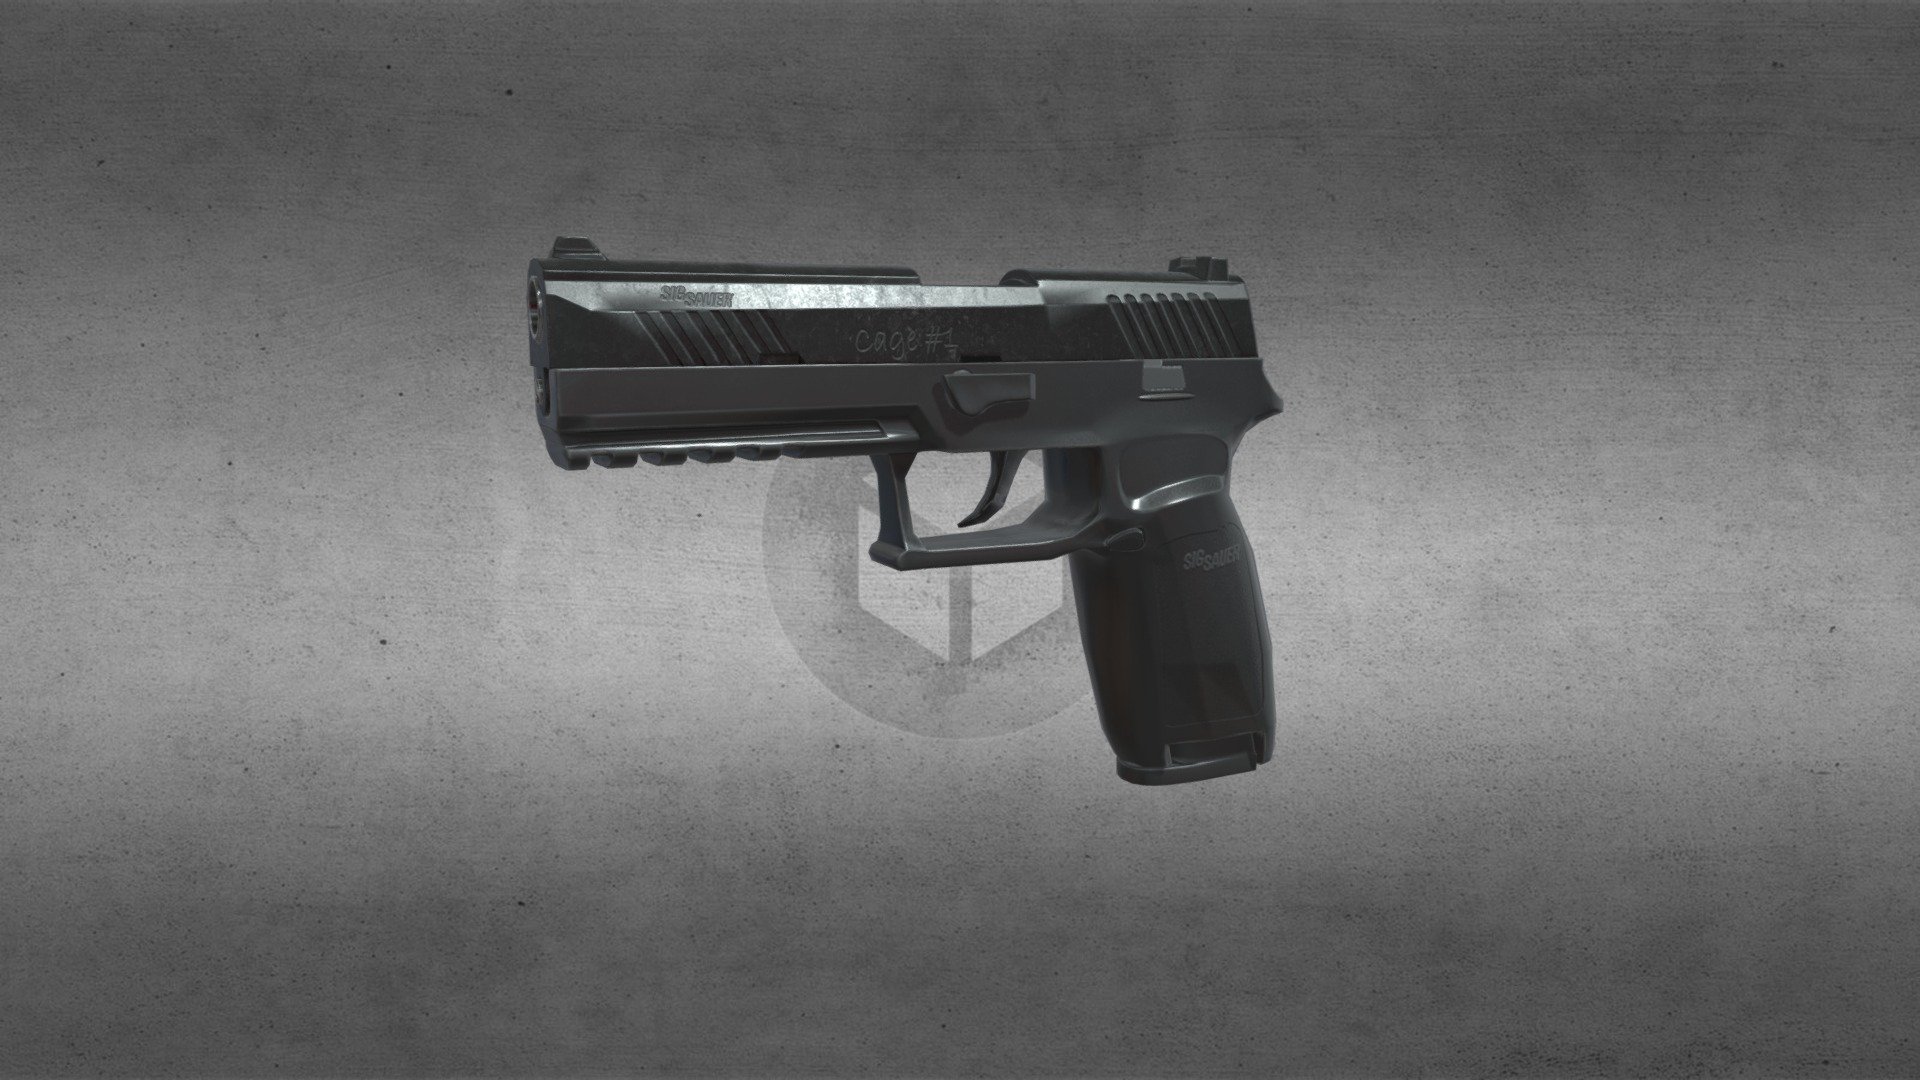 Low Poly p320 hand gun made in blender and textured in 3d coat 3d model